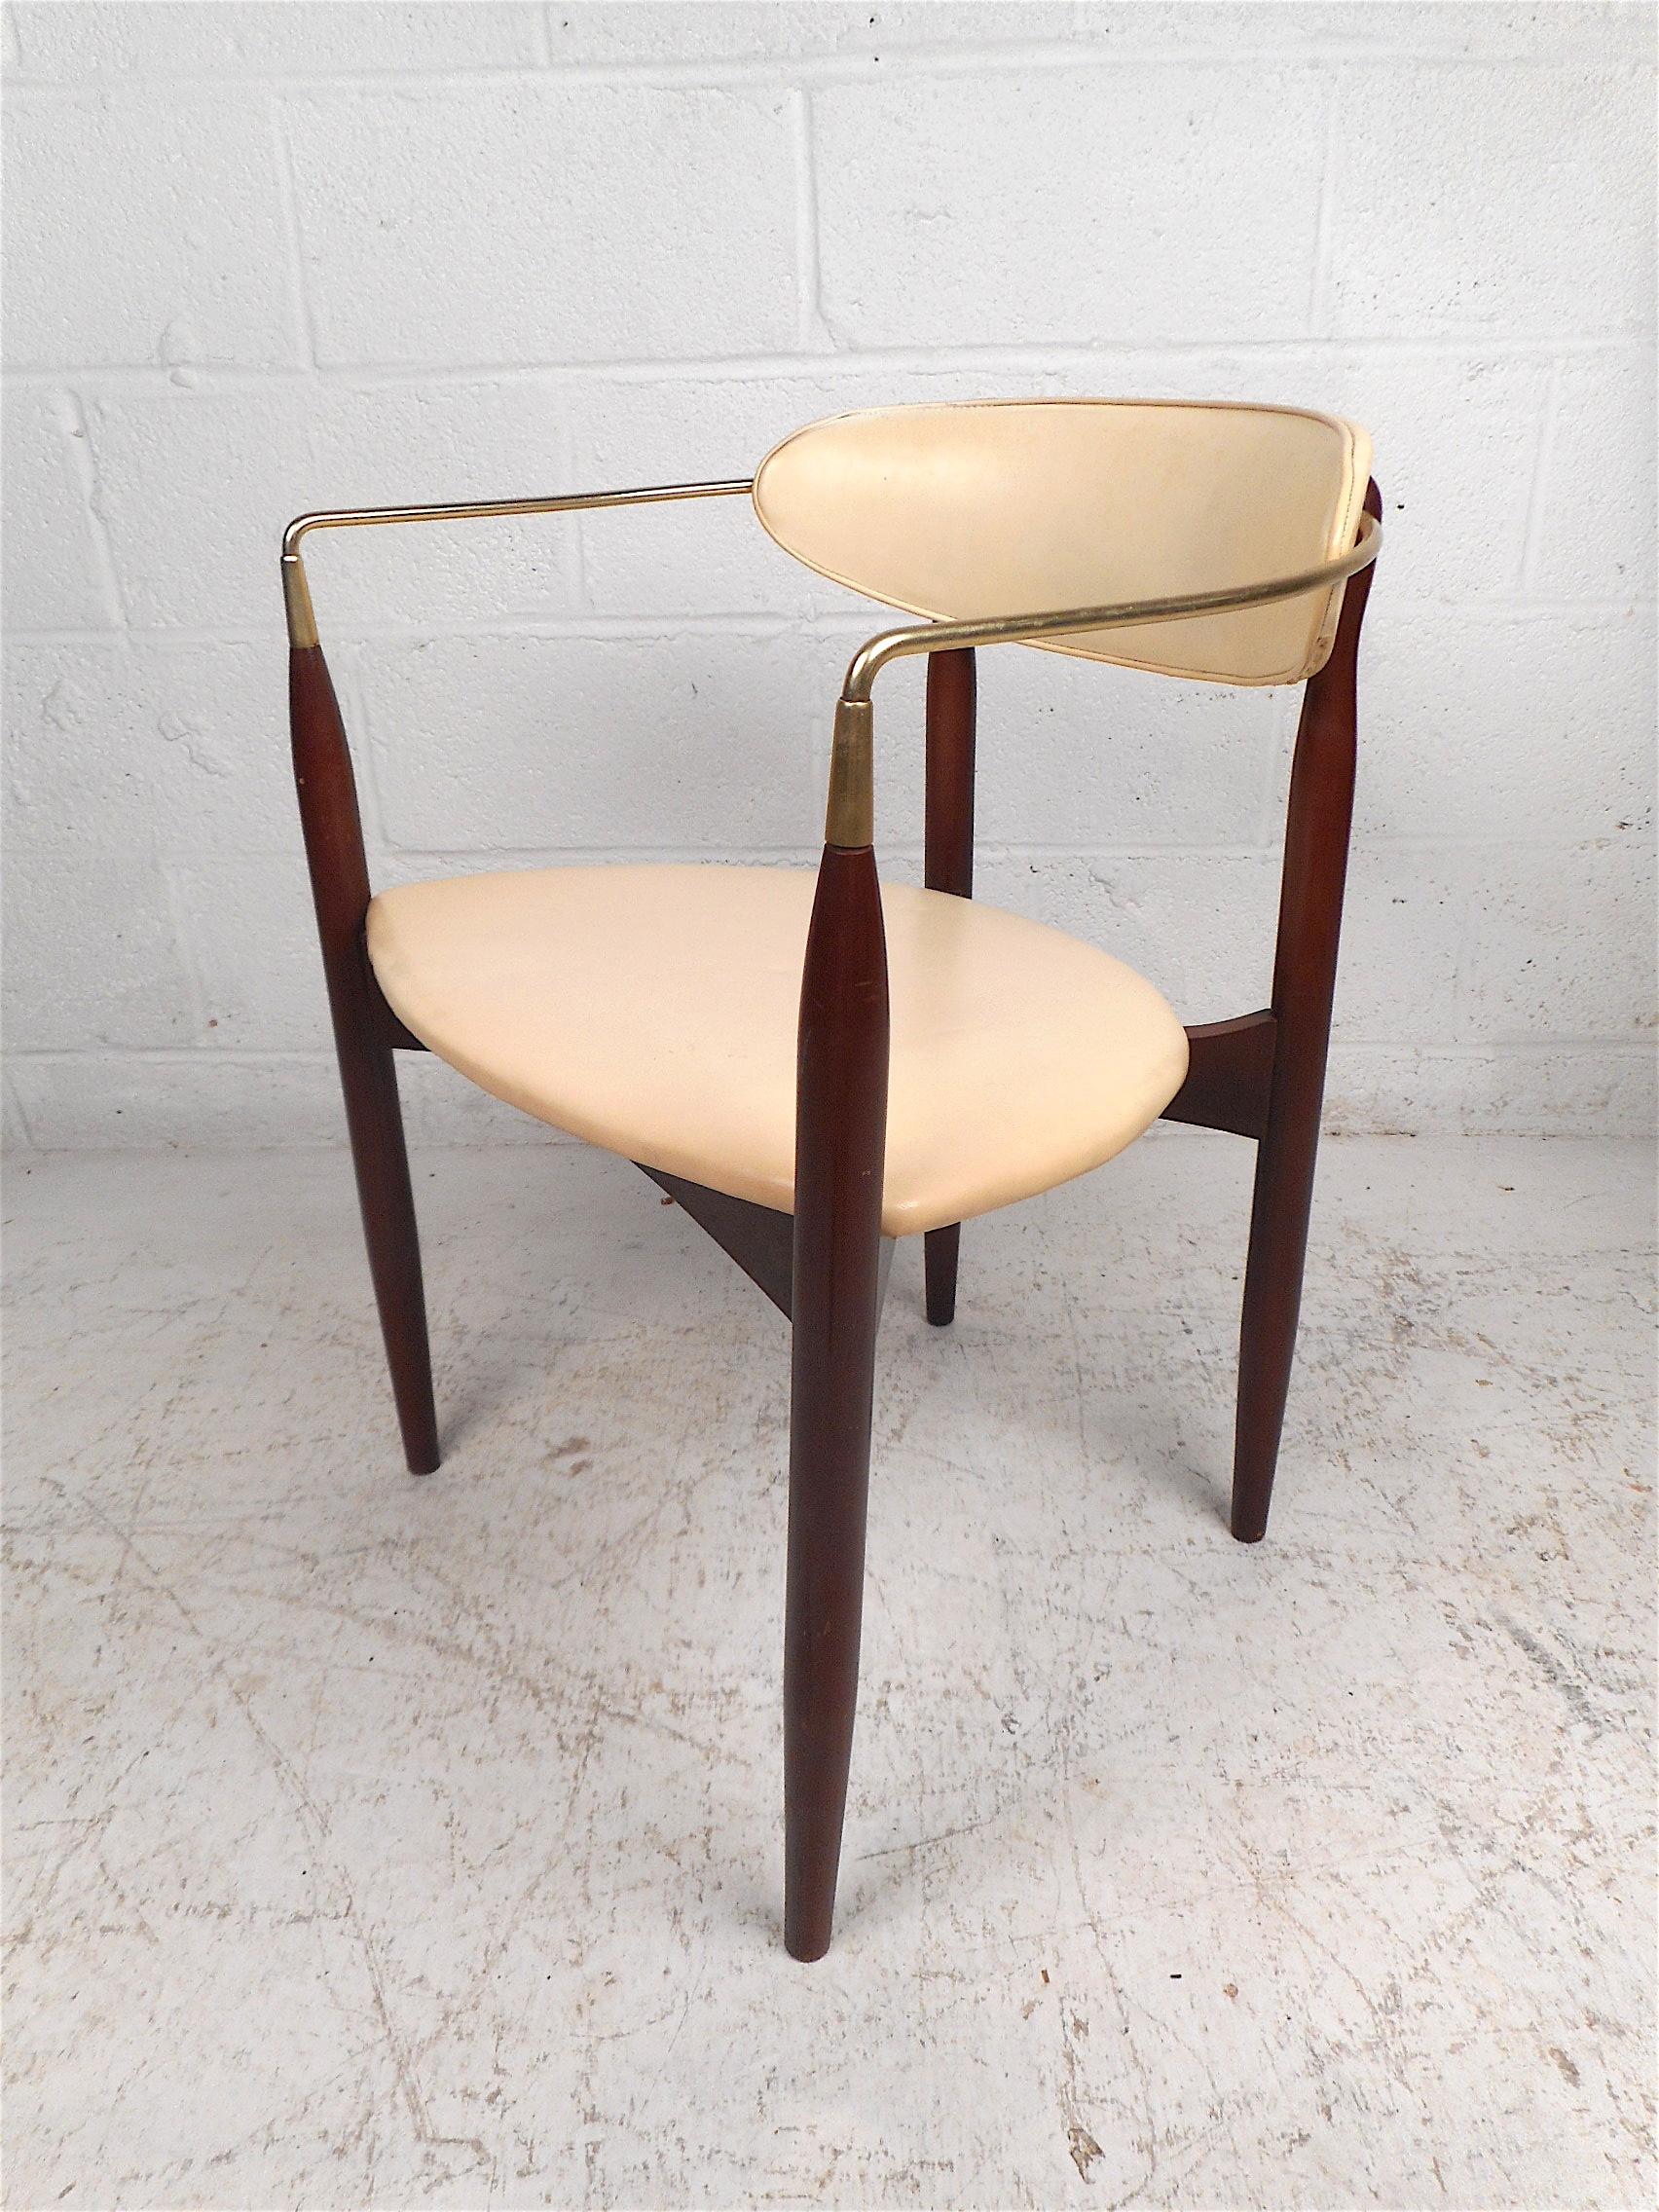 Stylish Mid-Century Modern chair manufactured by Kedawood Furniture. Unusual design with tapered legs, contoured brass armrests, seat and backrest covered in a vintage white vinyl. This chair is sure to make a great addition to any modern interior.